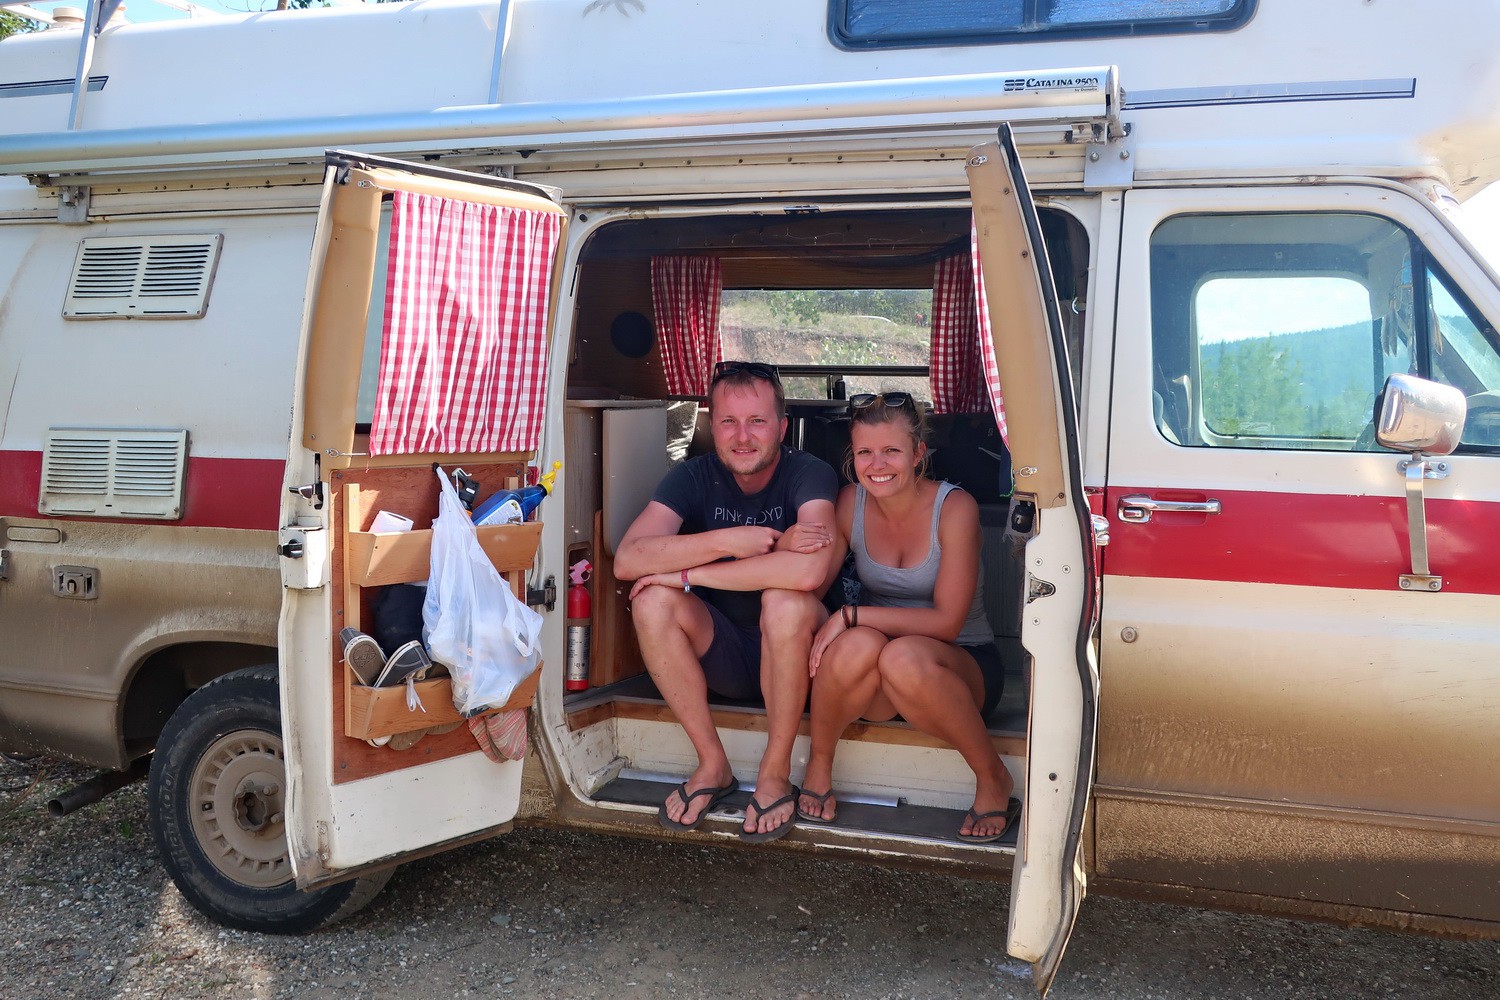 Friends from Germany with a nice camper